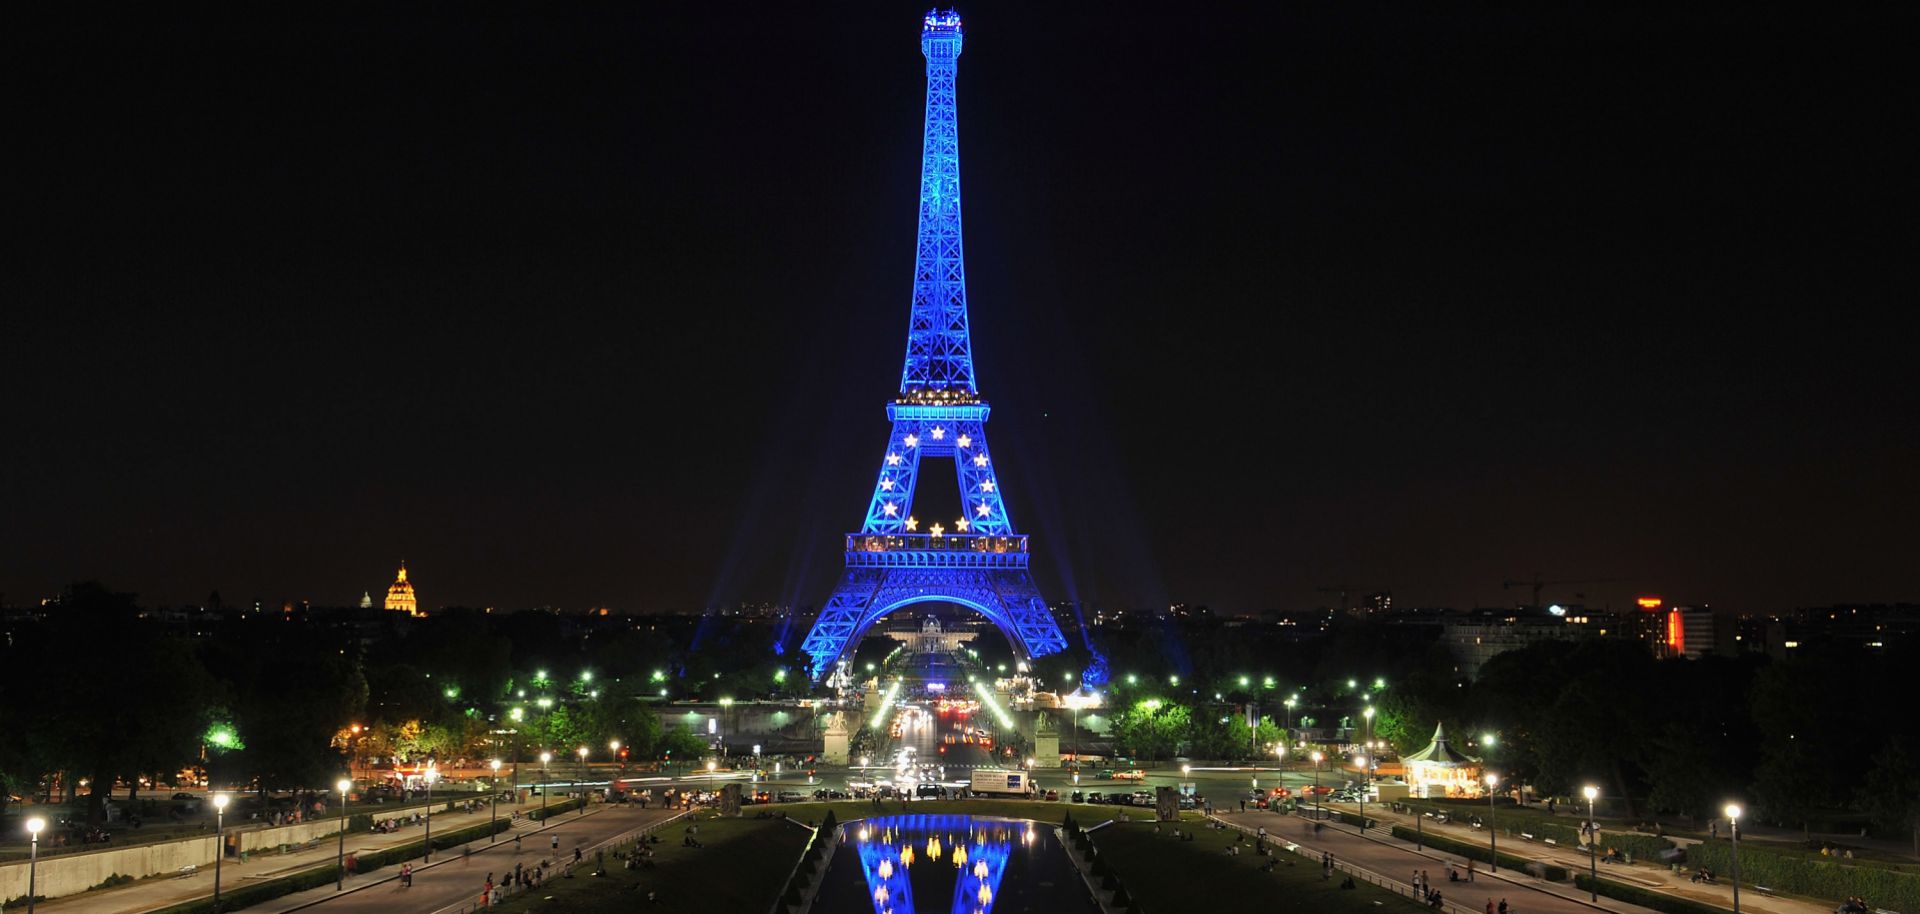 The Eiffel tower is lit with symbols of the European Union, including the stars and blue color that make up the bloc's flag. 